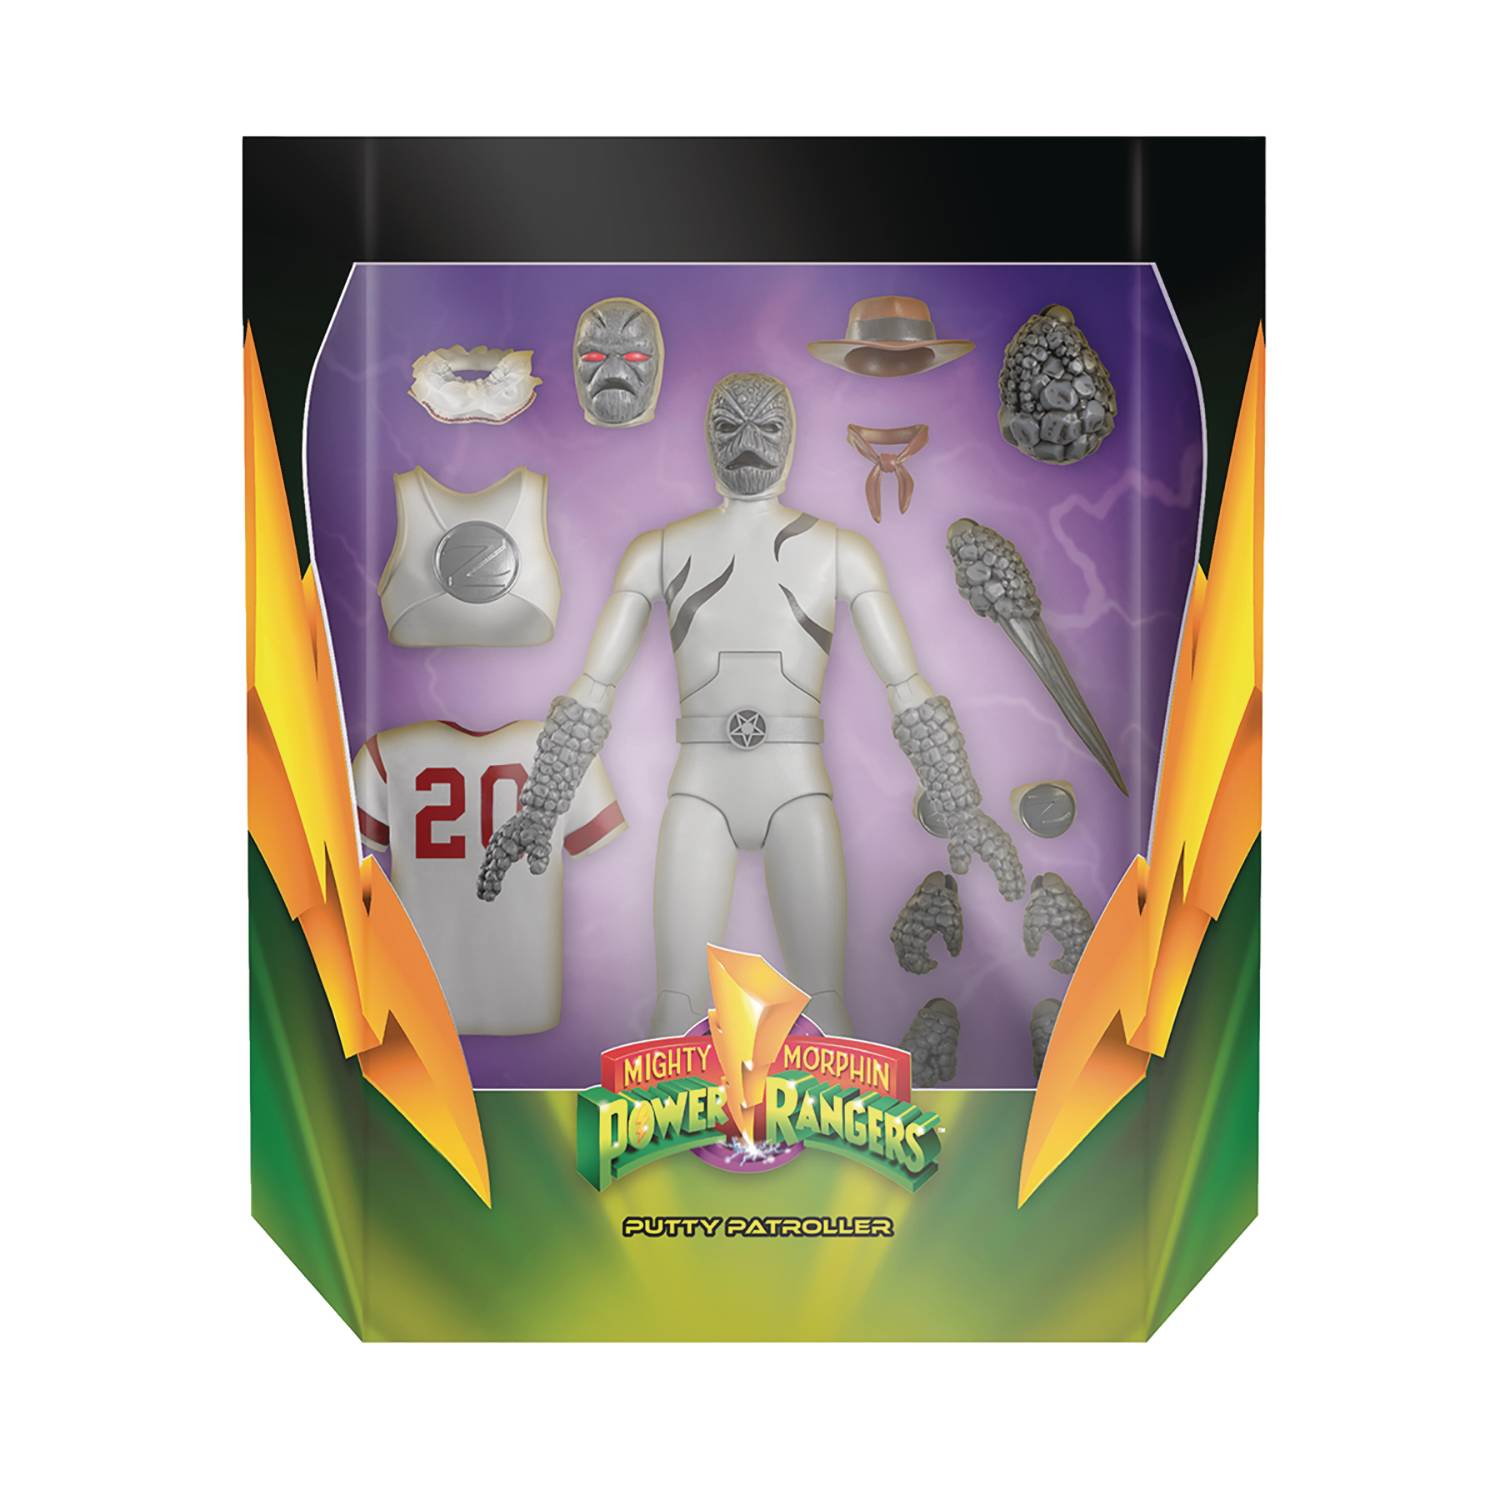 POWER RANGERS ULTIMATES PUTTY PATROLLER ACTION FIGURE